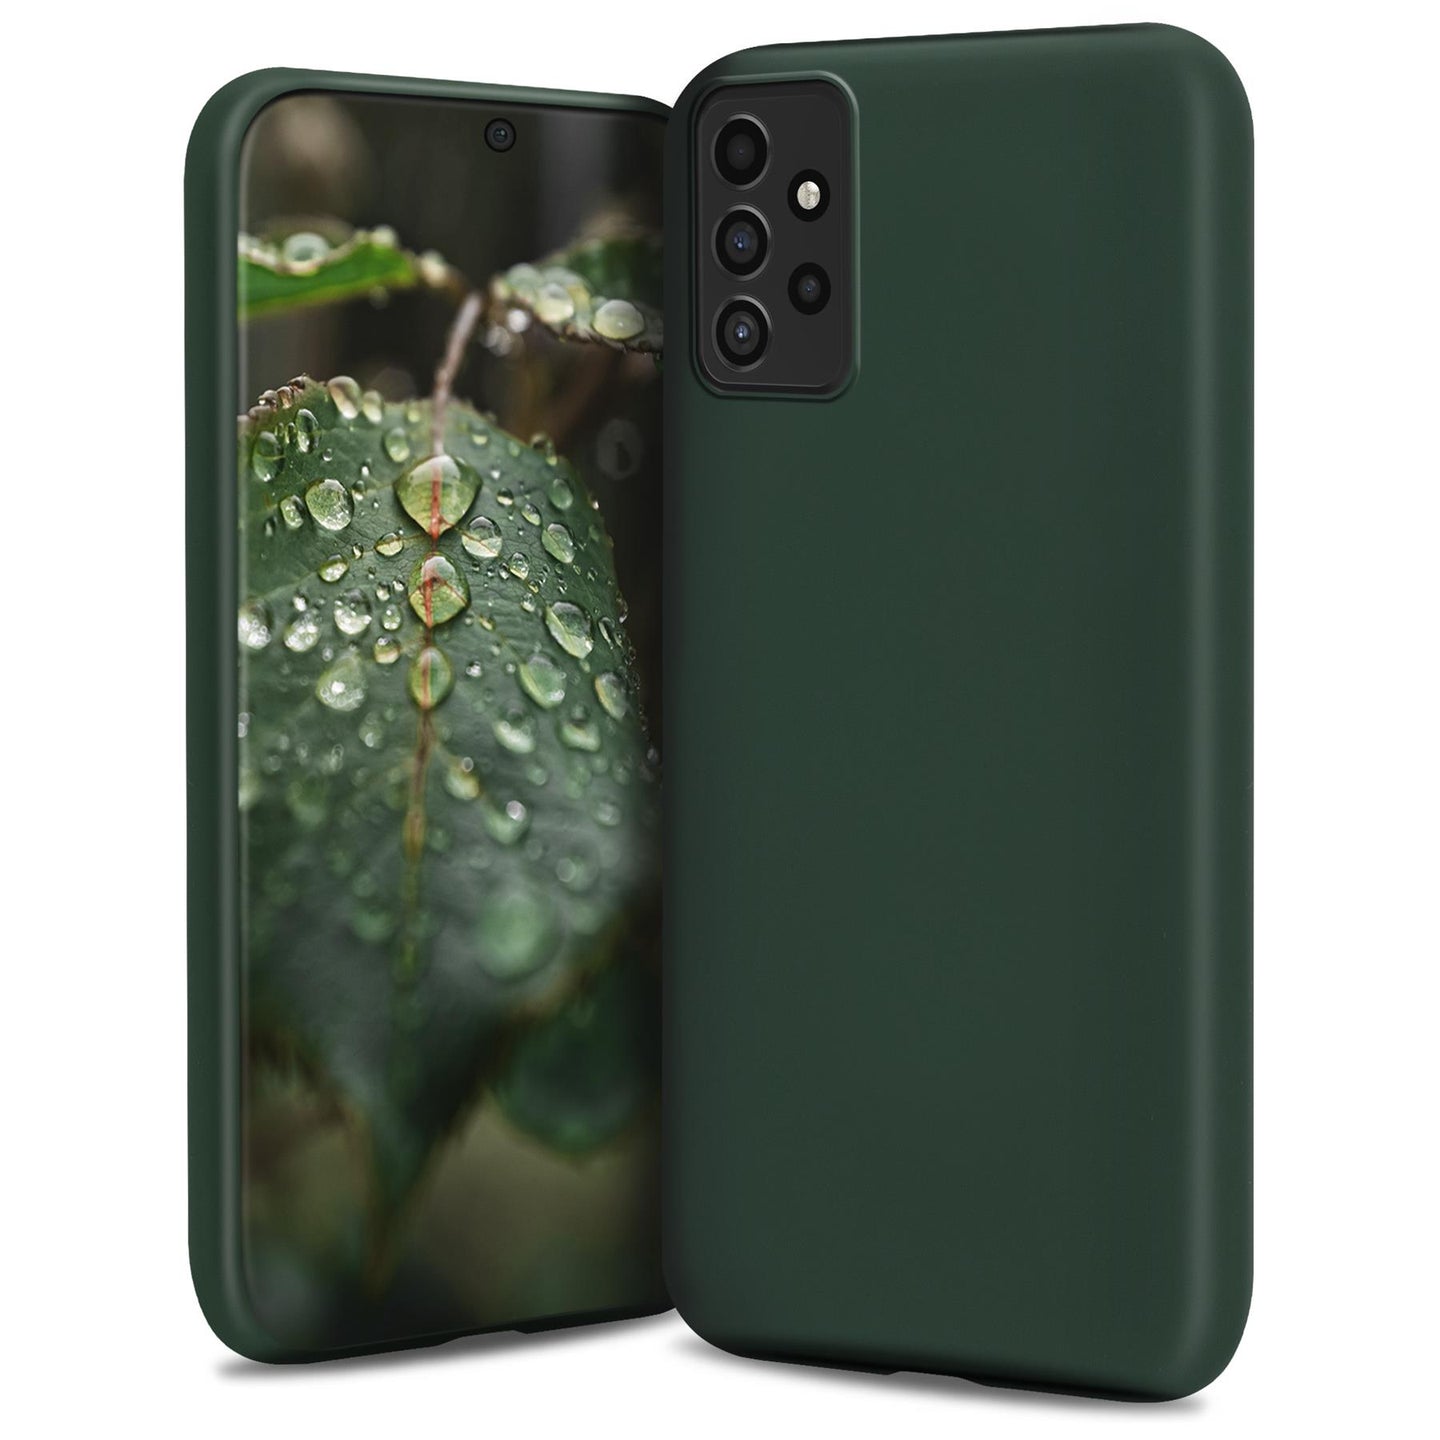 Moozy Lifestyle. Designed for Samsung A52, Samsung A52 5G Case, Dark Green - Liquid Silicone Lightweight Cover with Matte Finish